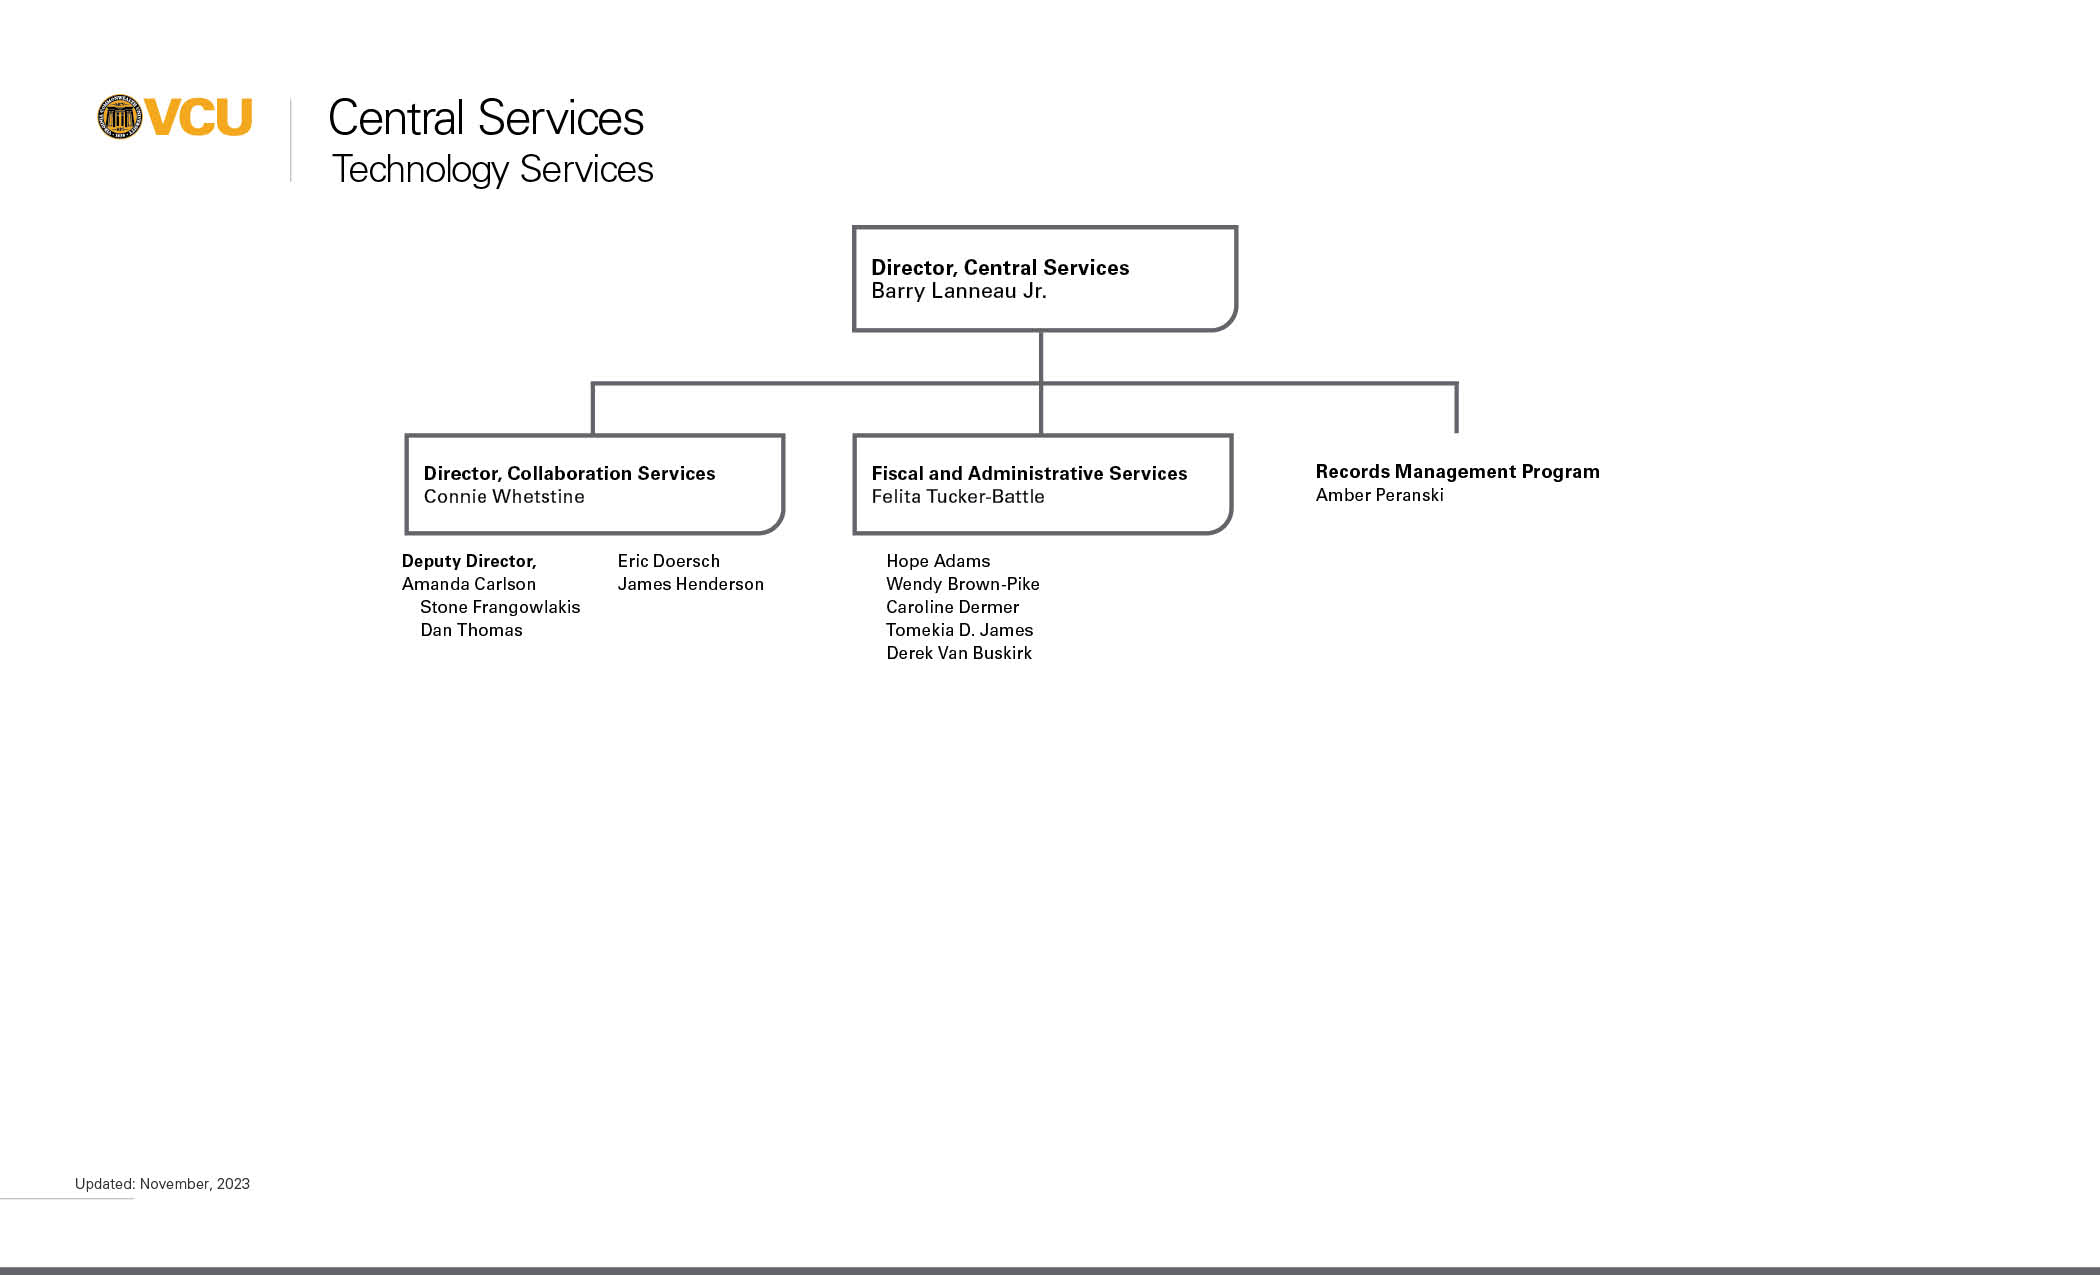 Central Services org chart